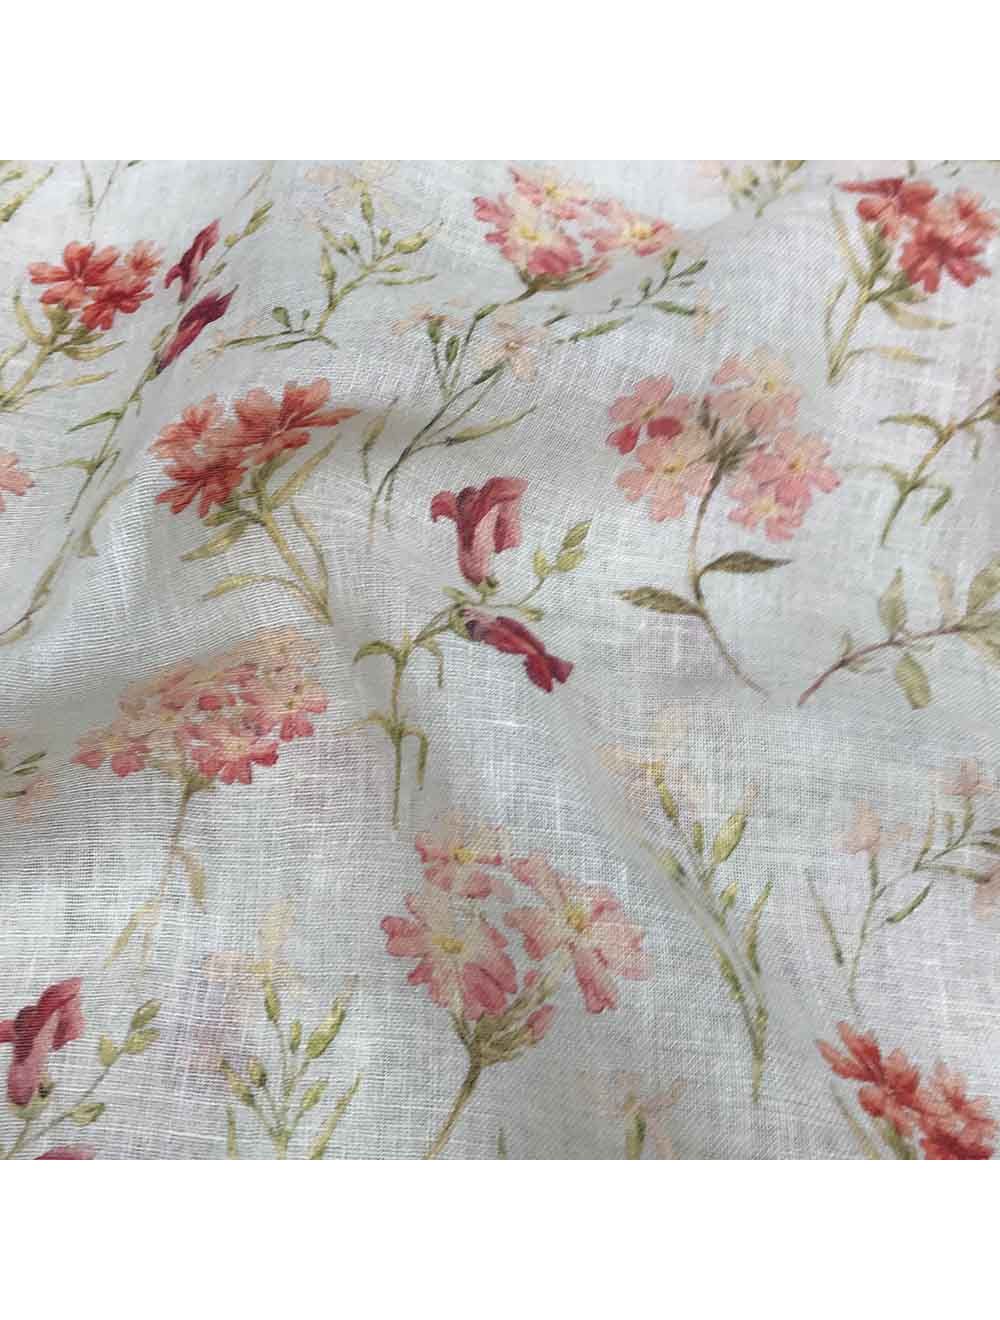 Off-White Pure Linen Multi Color Floral Printed Fabric